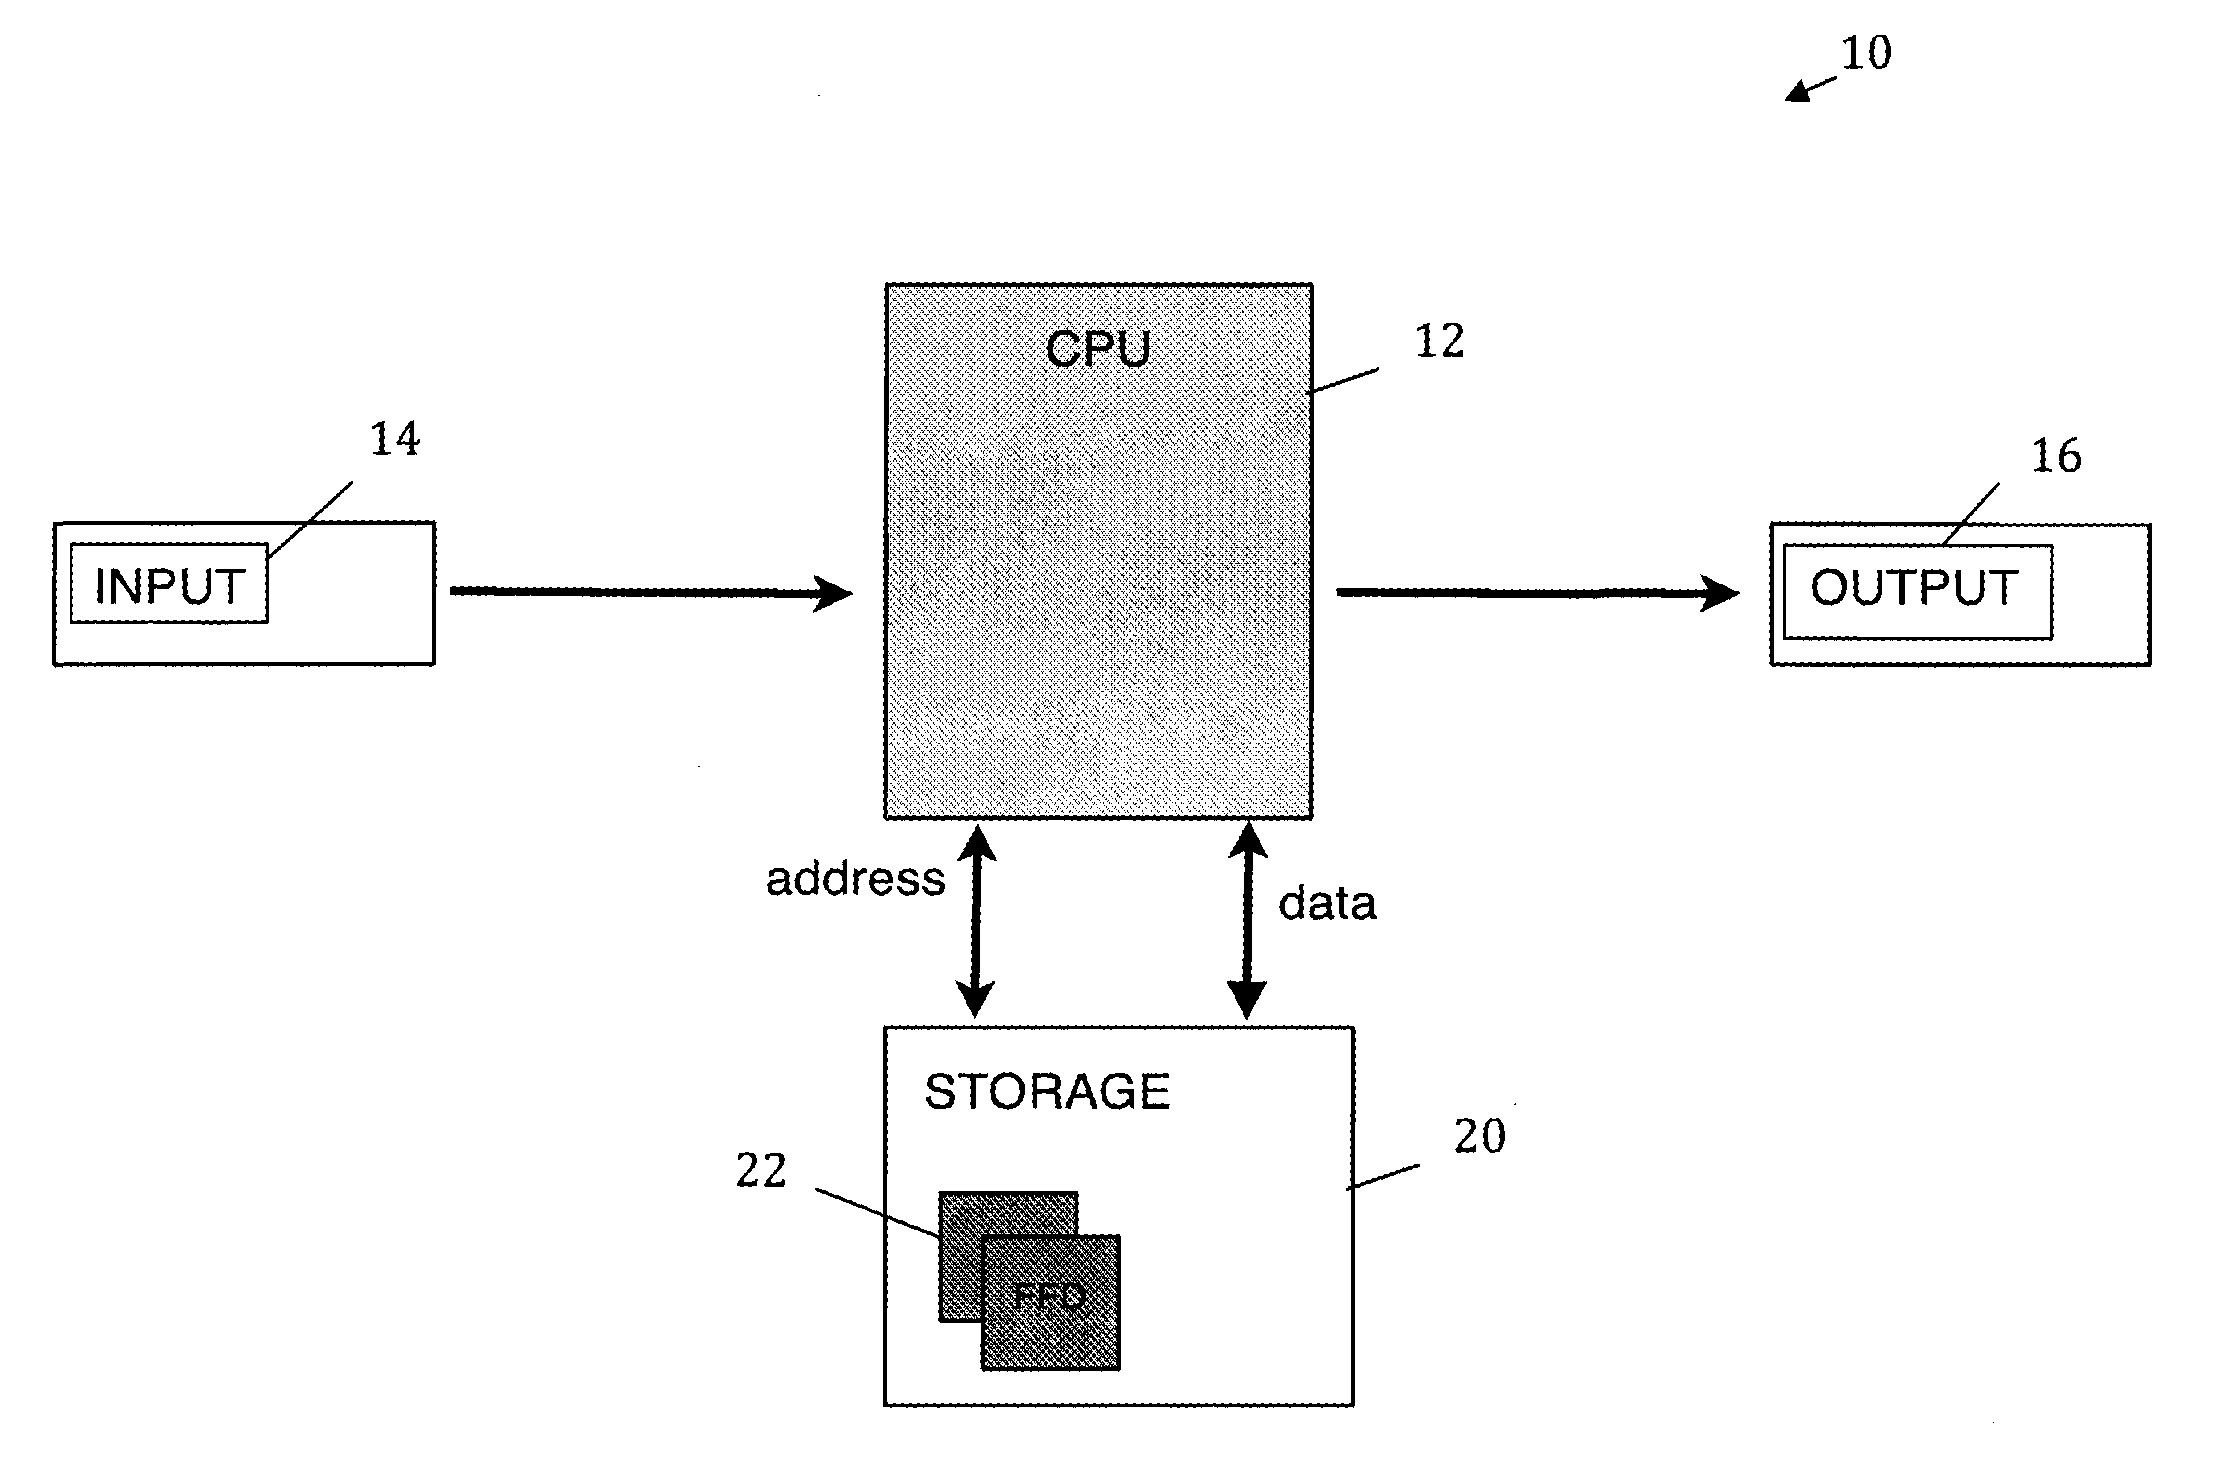 System and method for approximate searching very large data